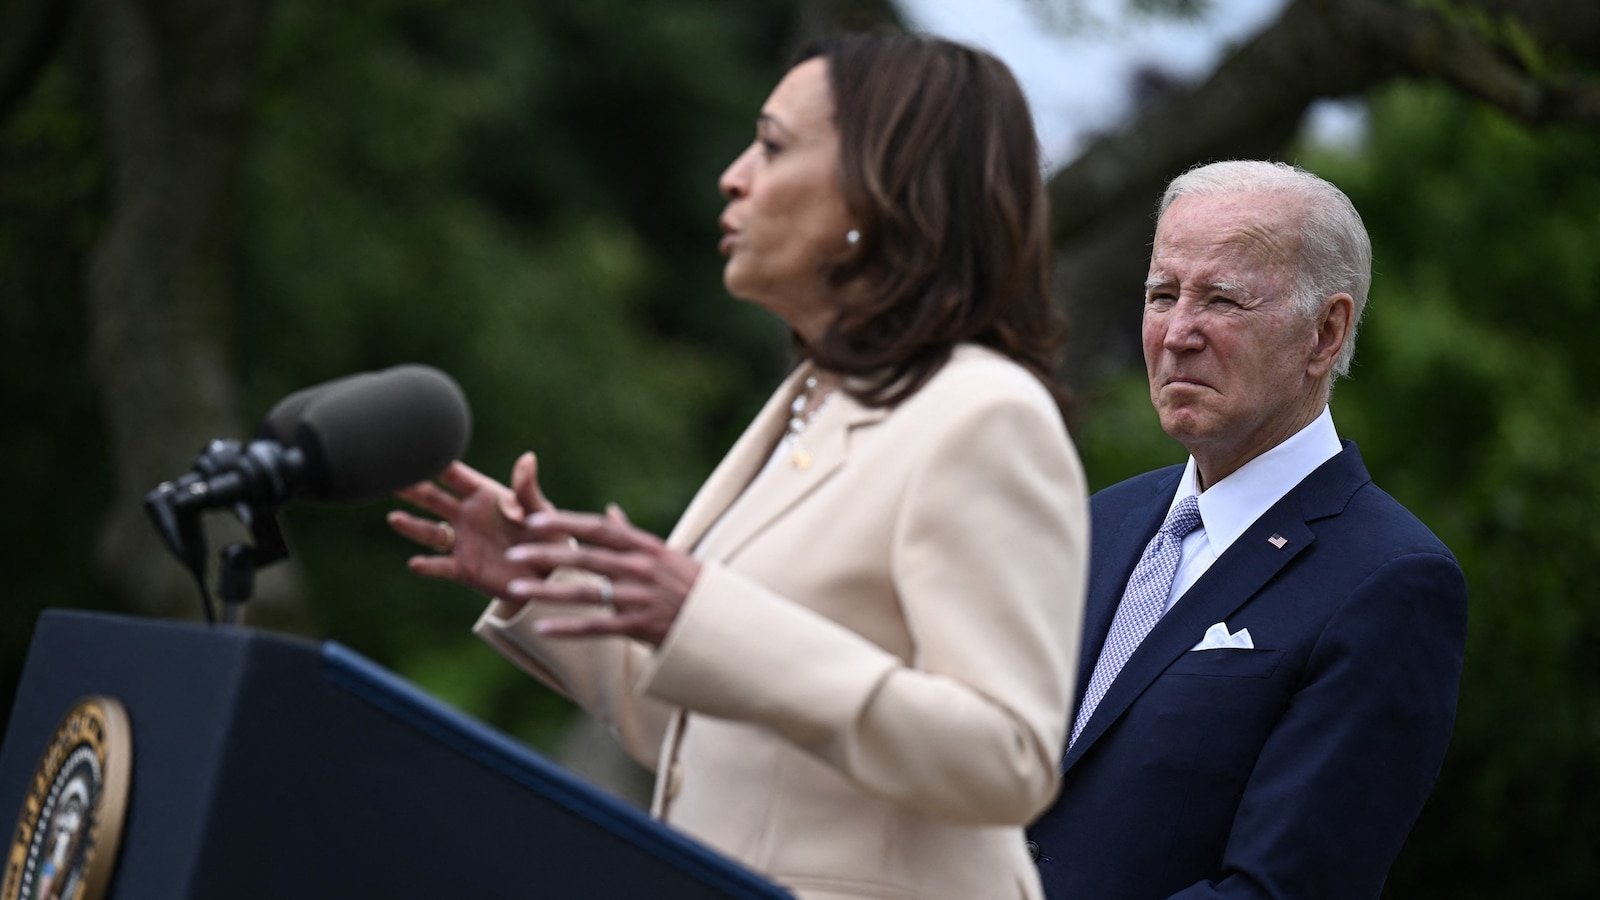 Where Harris' agenda could break from Biden's on key issues for voters